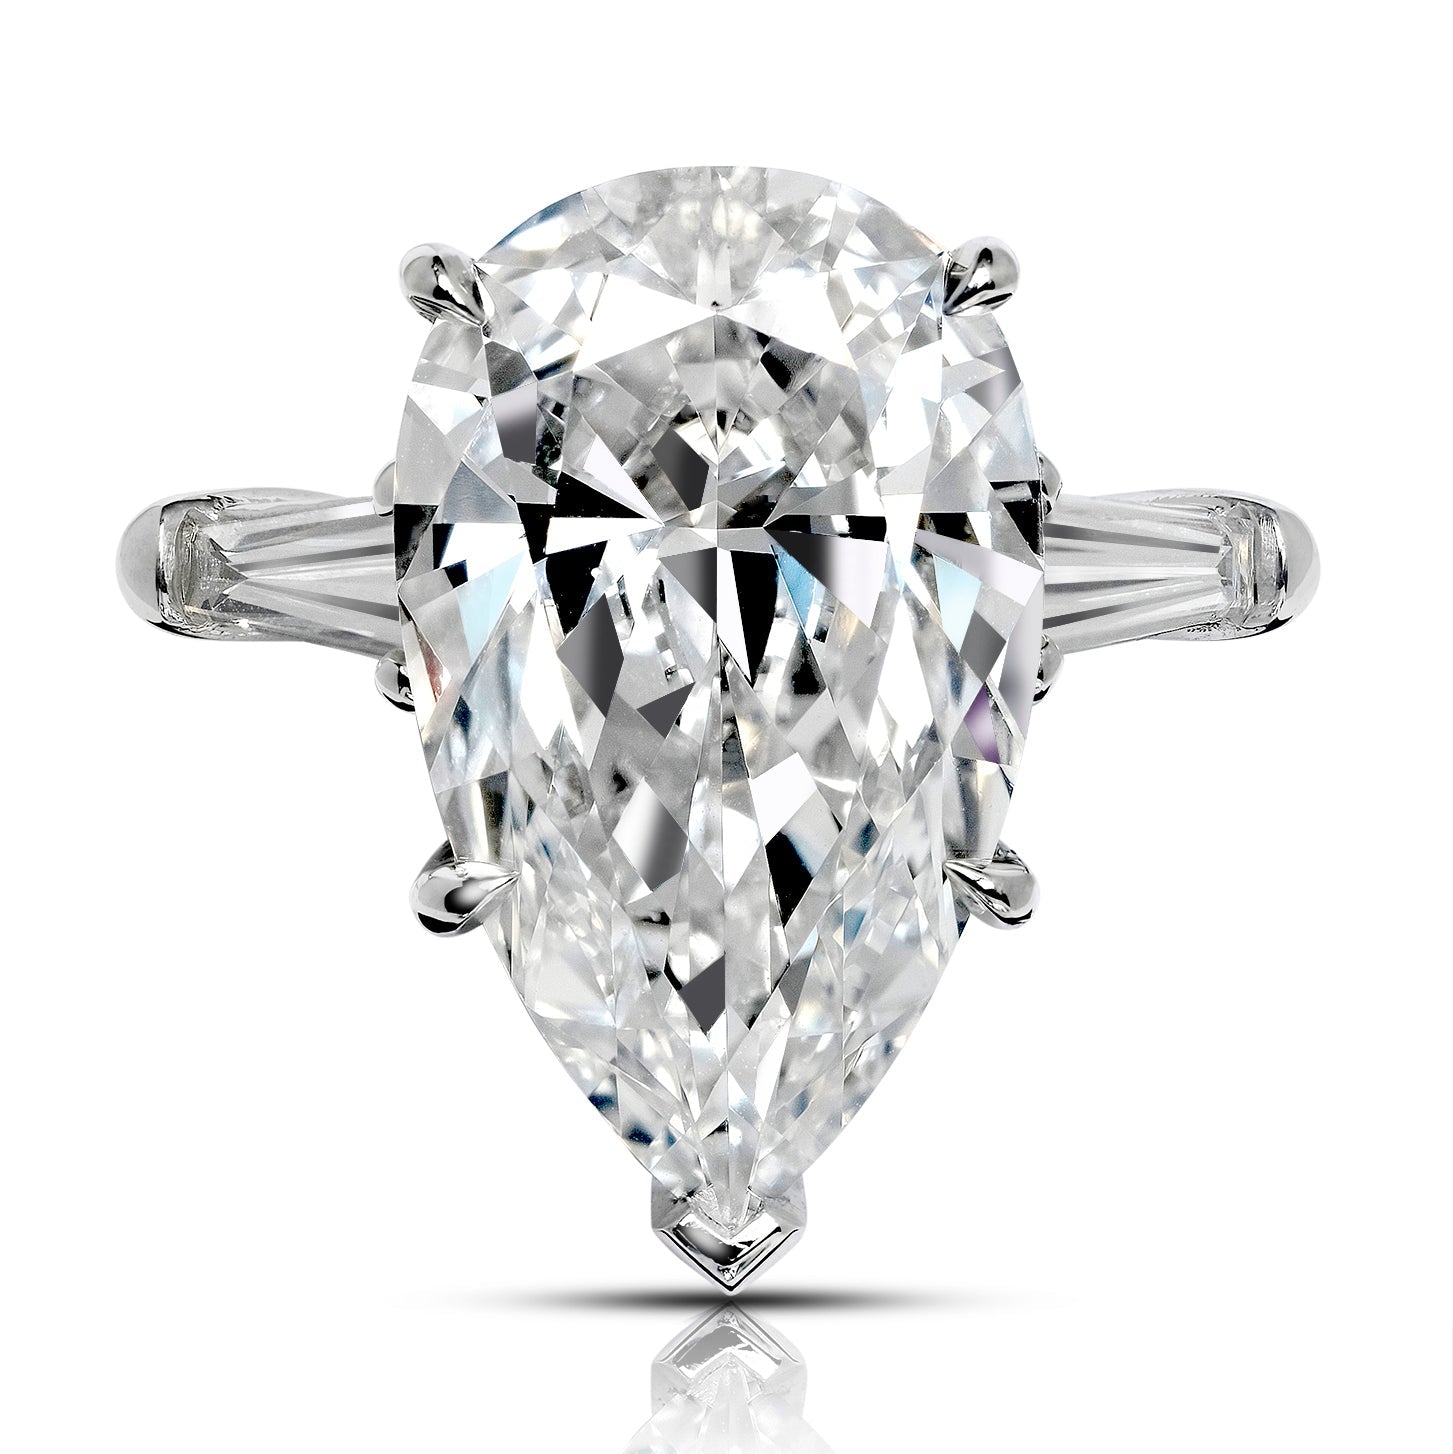 Diamond Ring Pear Shape Cut 8 Carat Solitaire Ring in Platinum Front View